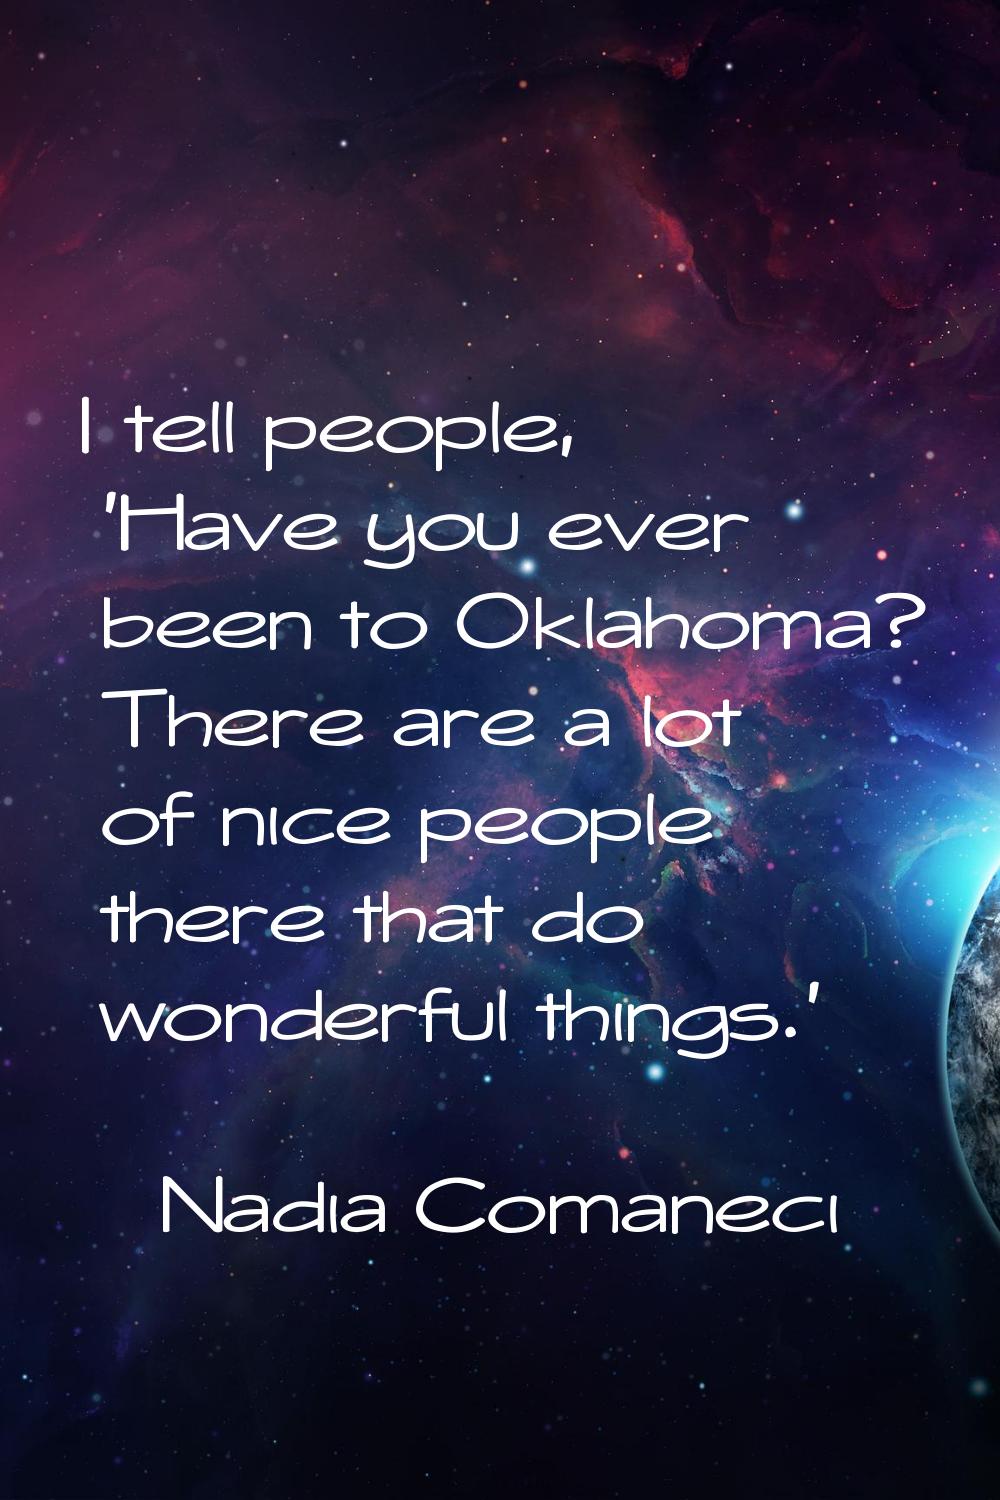 I tell people, 'Have you ever been to Oklahoma? There are a lot of nice people there that do wonder